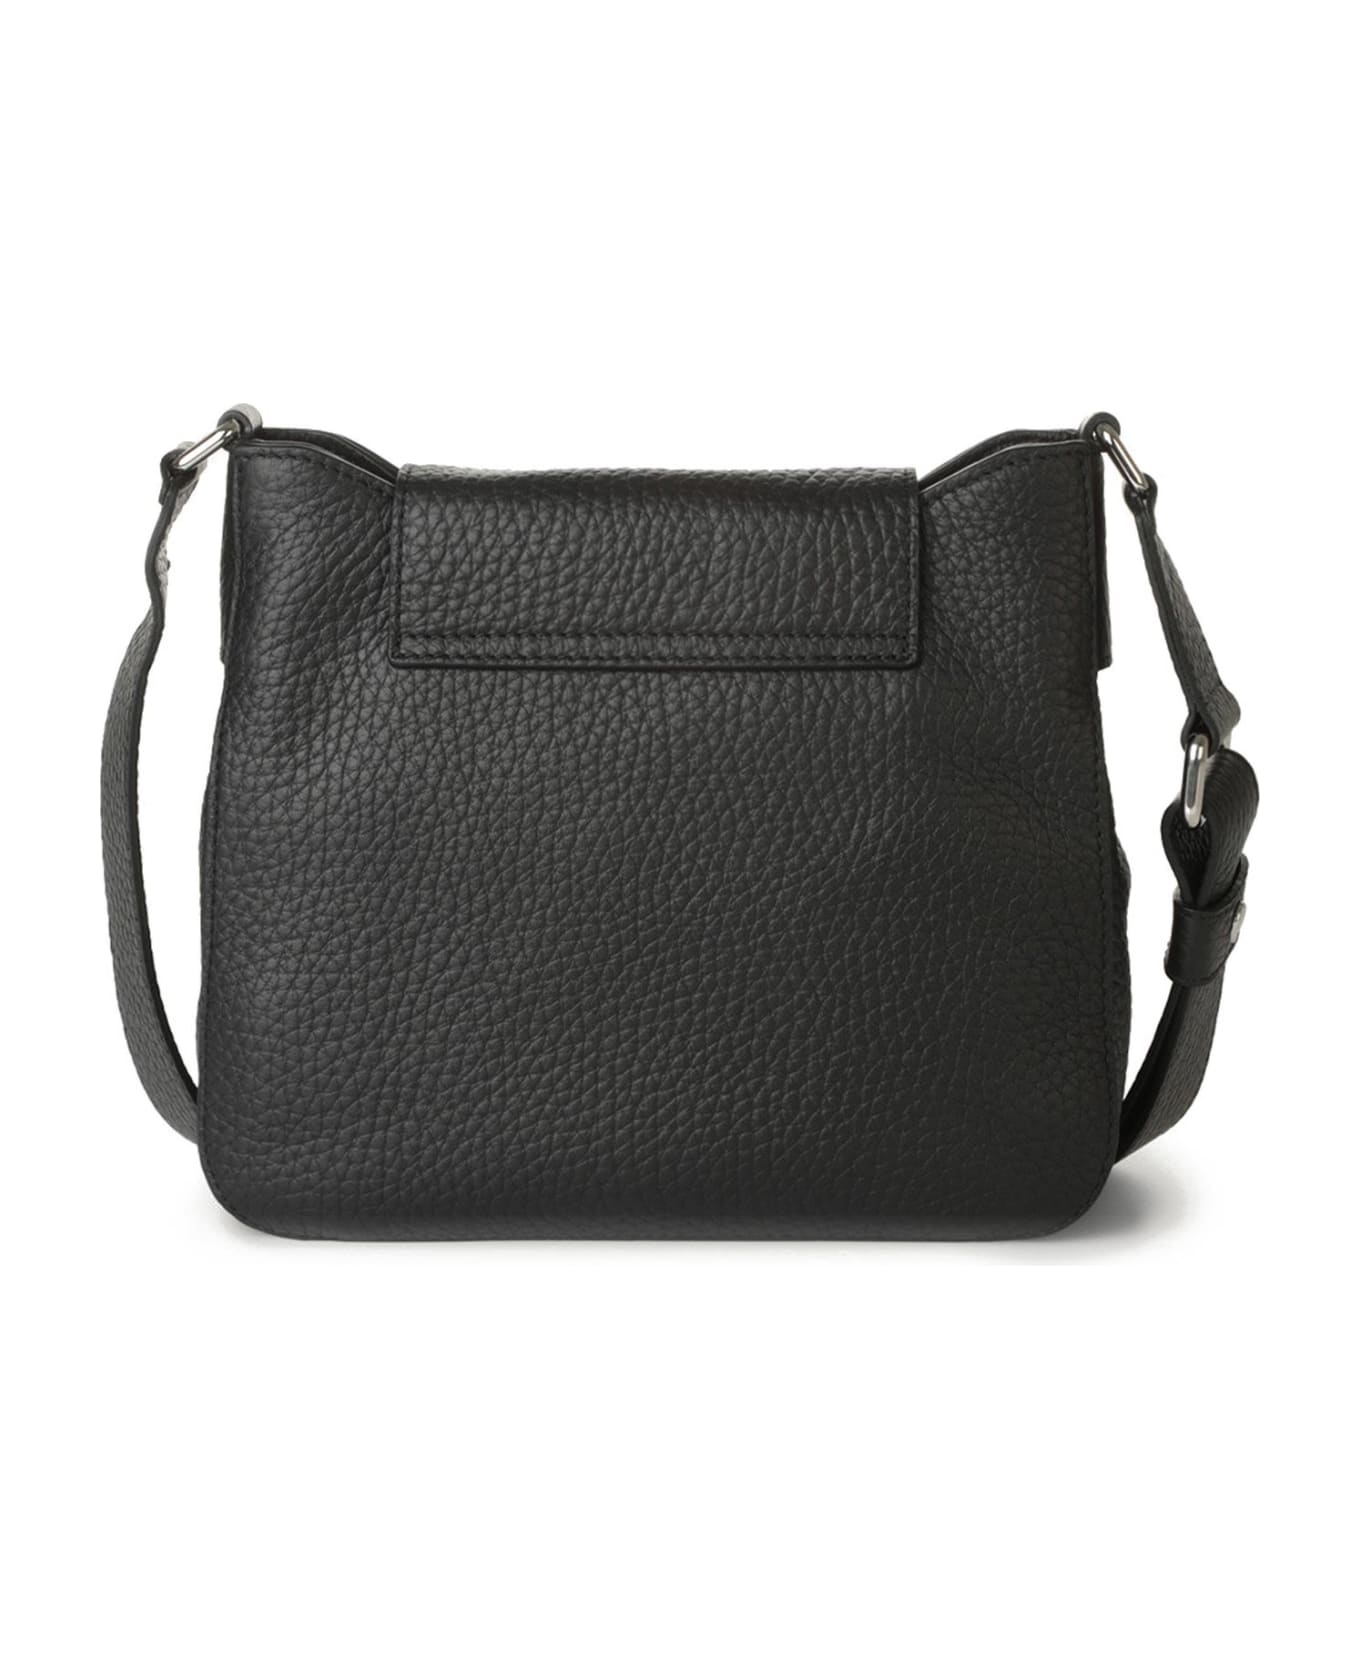 Orciani Dama Soft Midi Bag In Leather With Shoulder Strap - NERO ショルダーバッグ